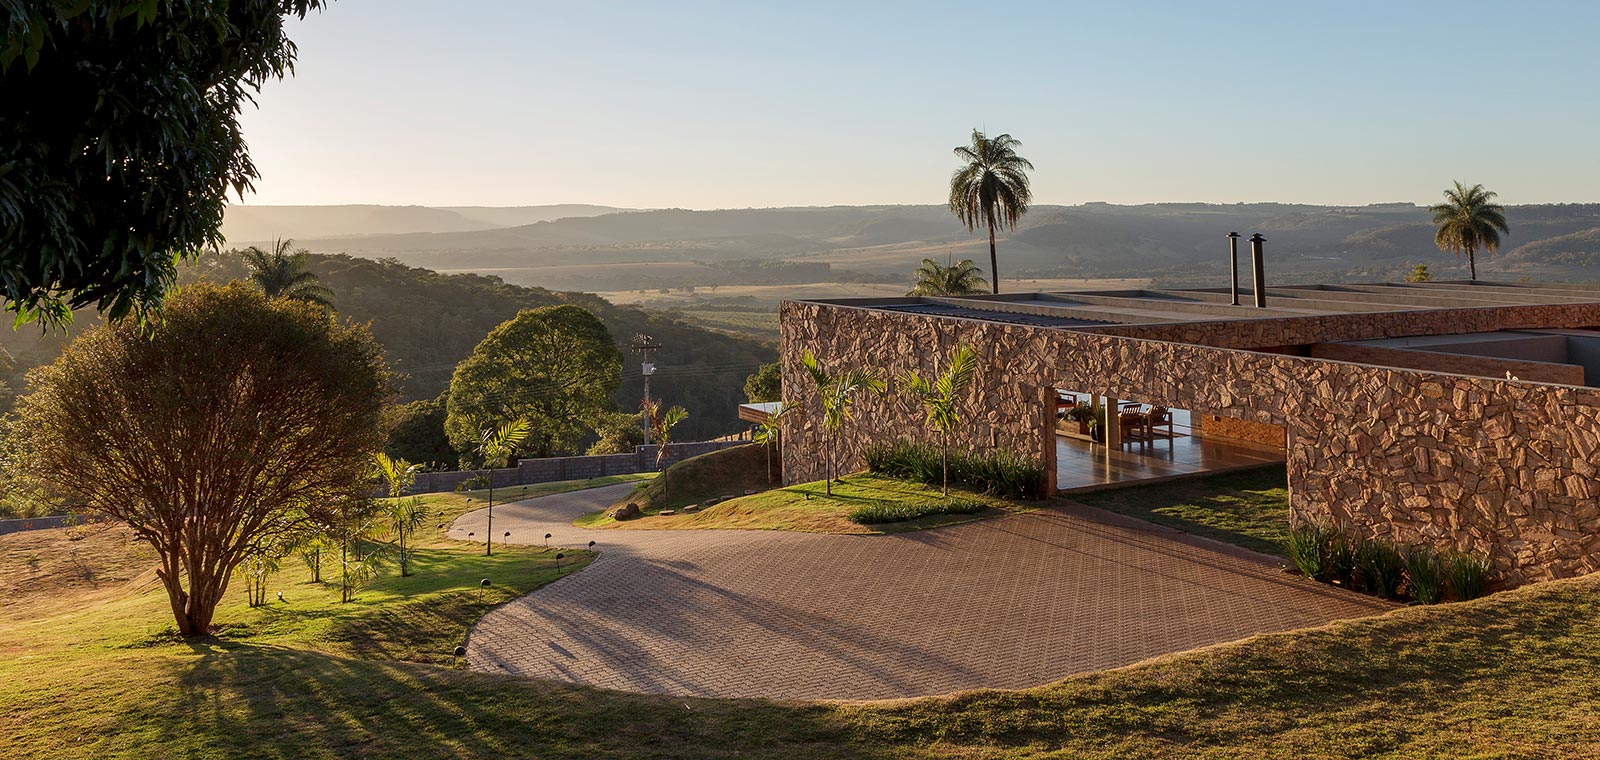 House of Stones by mf+arquitetos located in Brazil boasts amazing mountain views